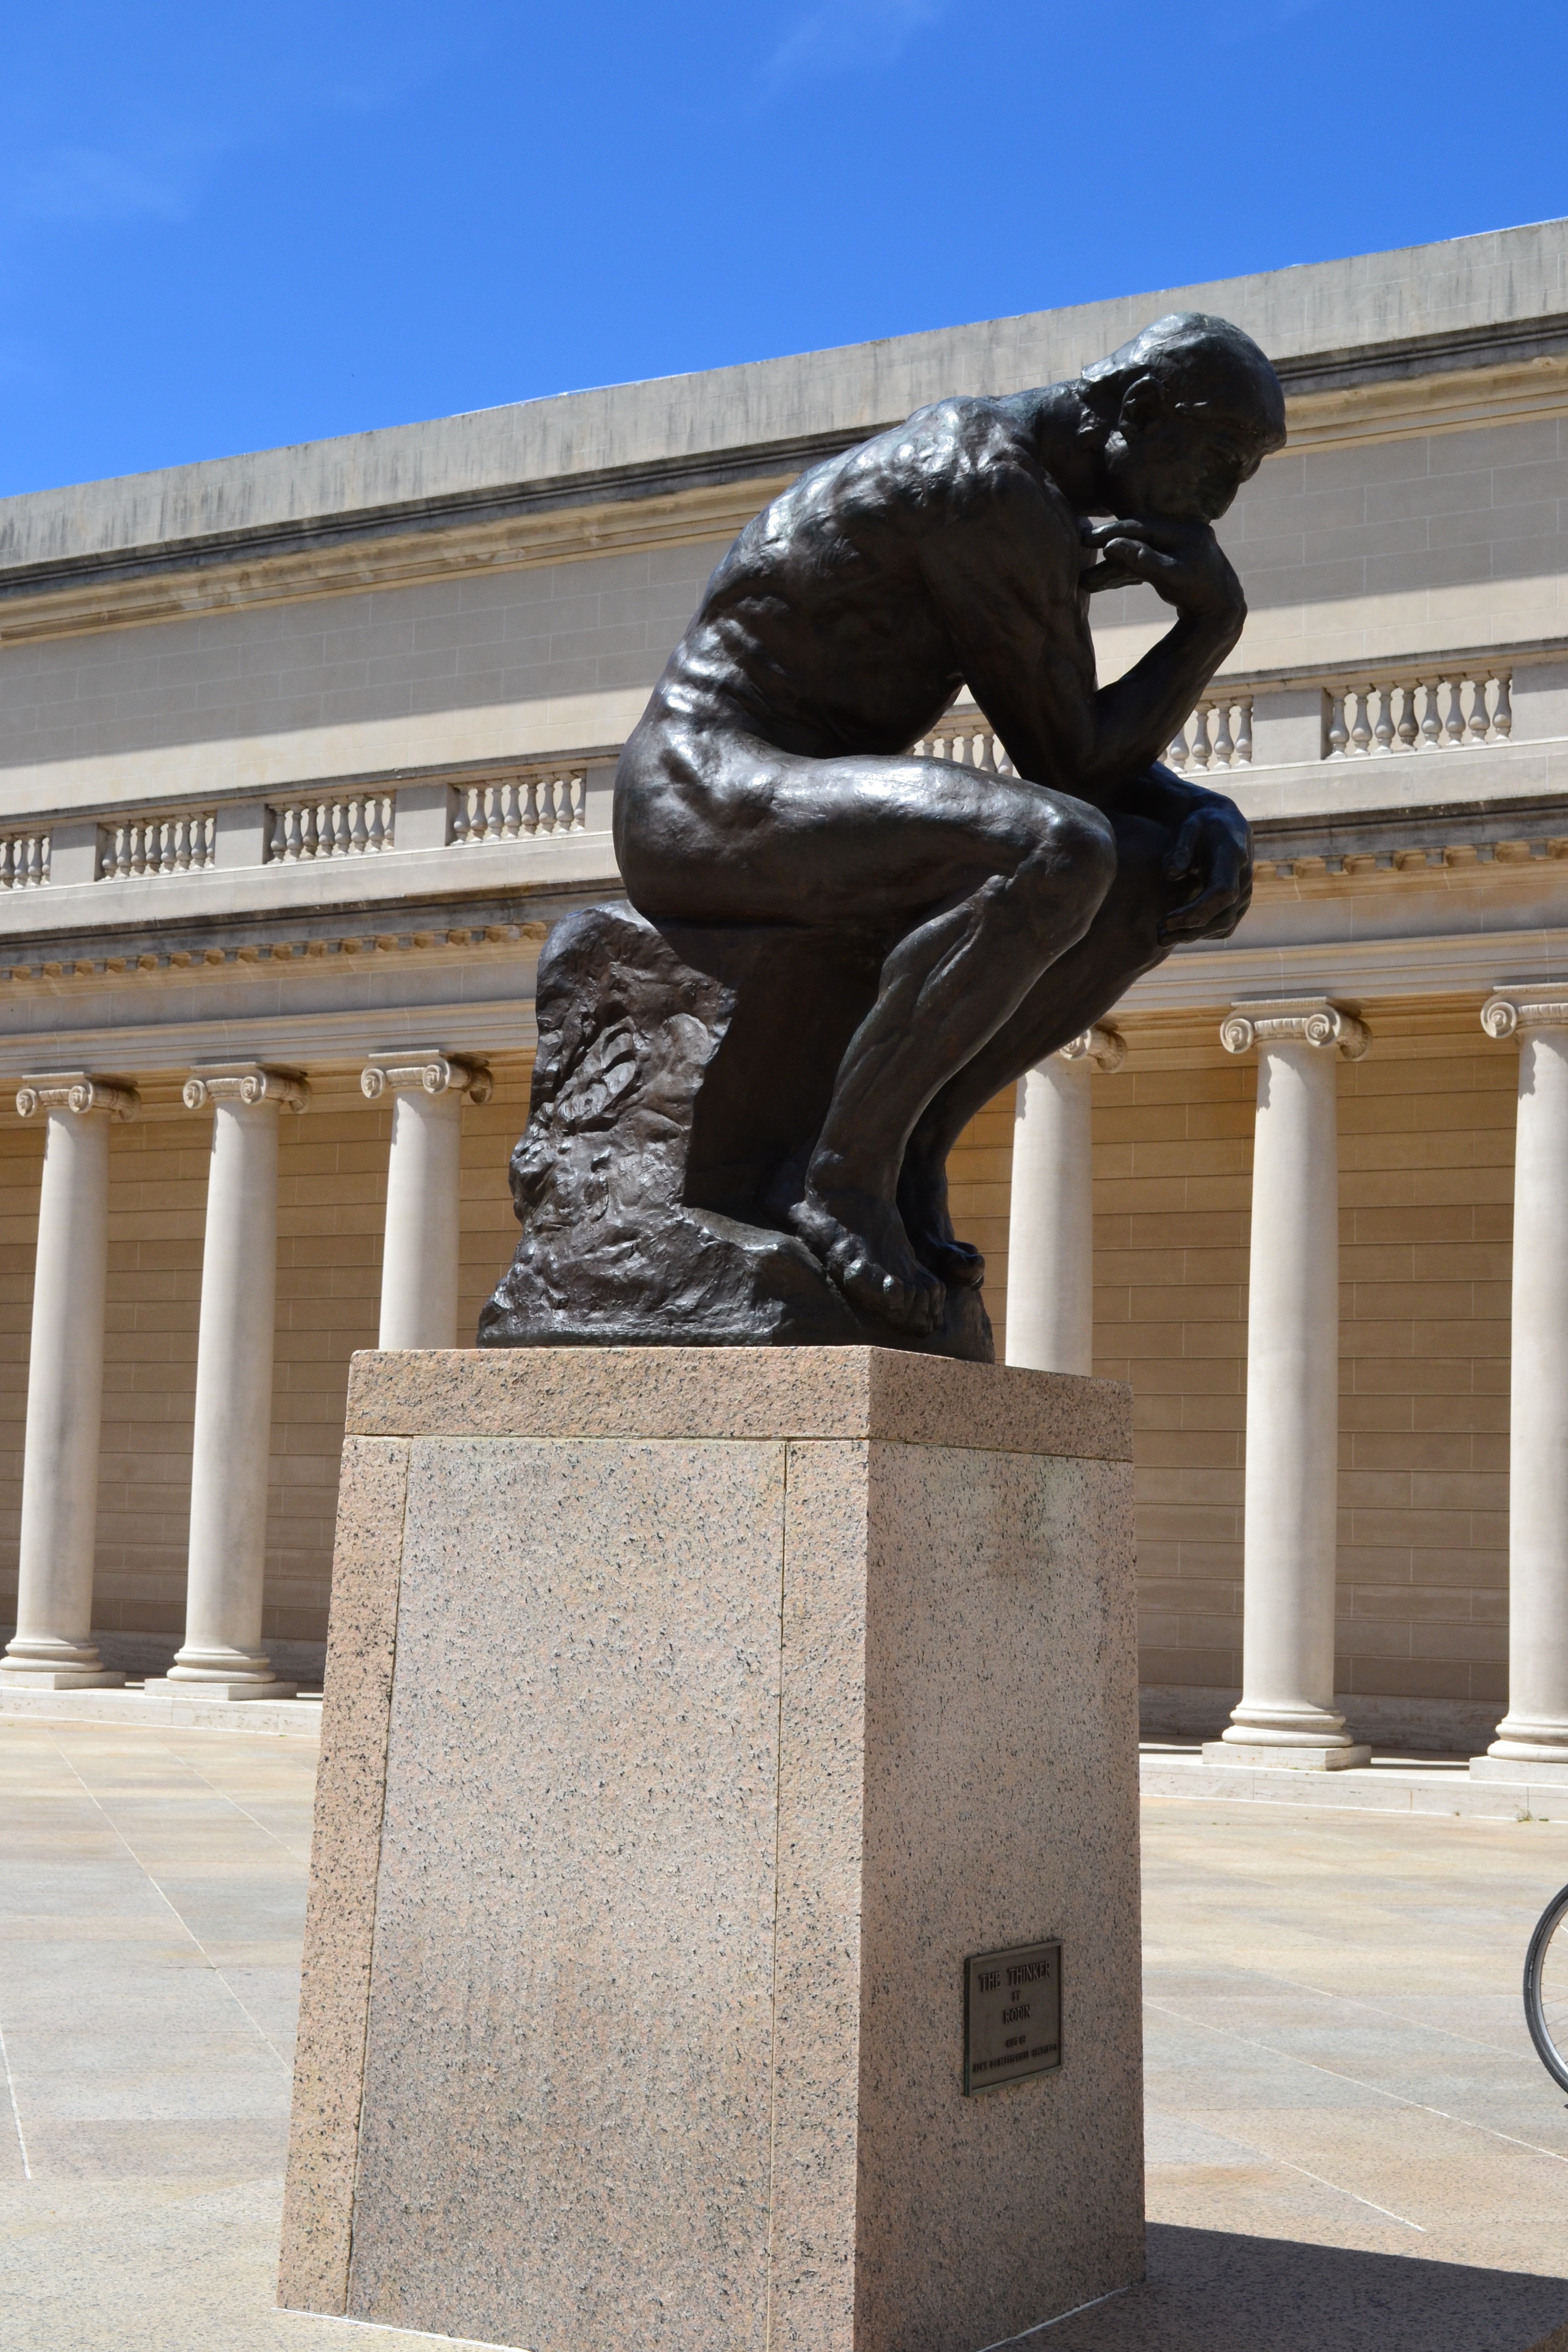 The Thinker - Auguste Rodin, 1904